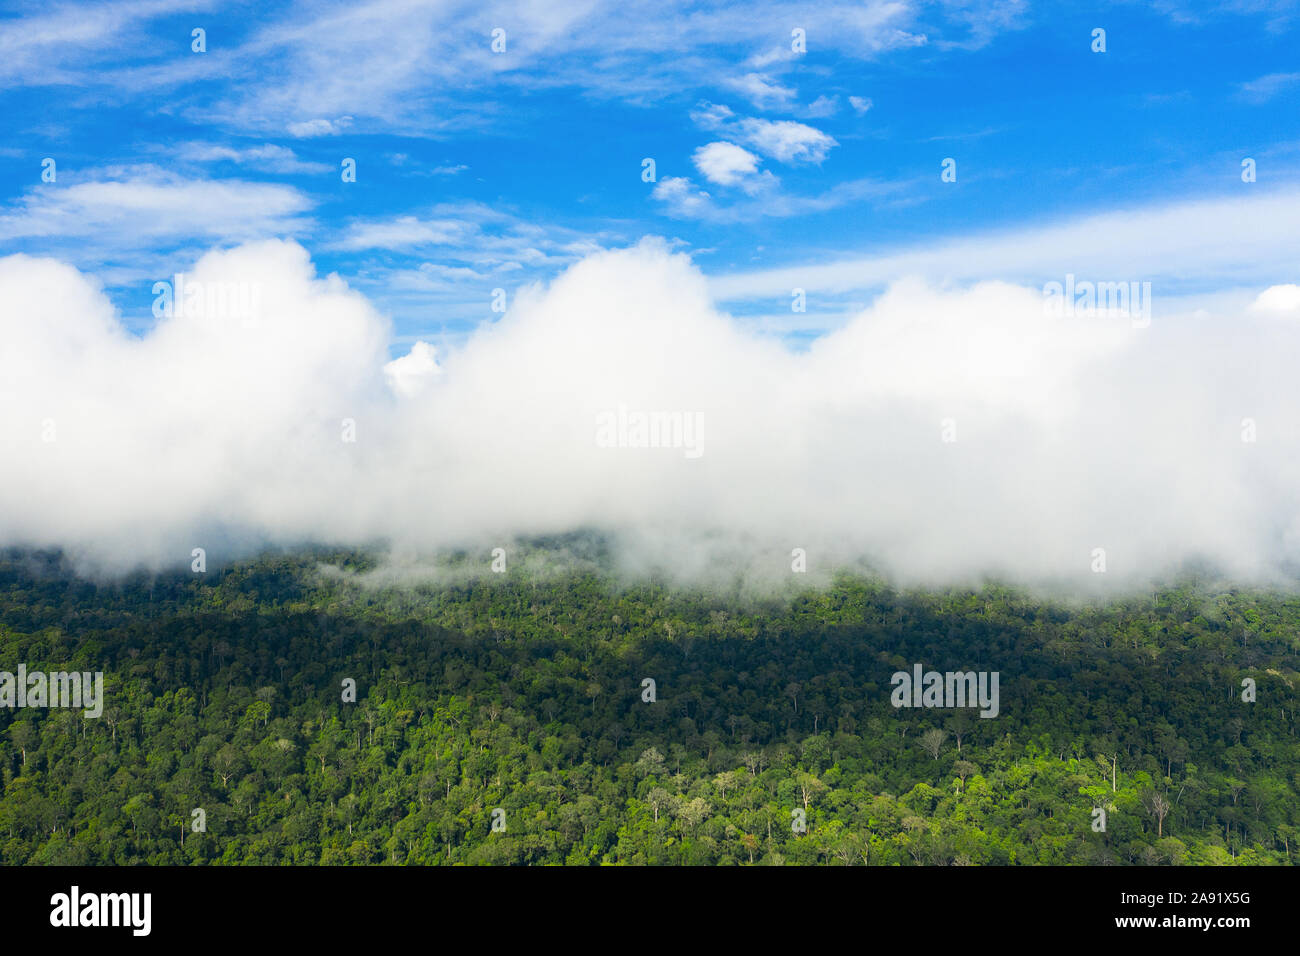 View from above, stunning aerial view of the Taman Negara National Park